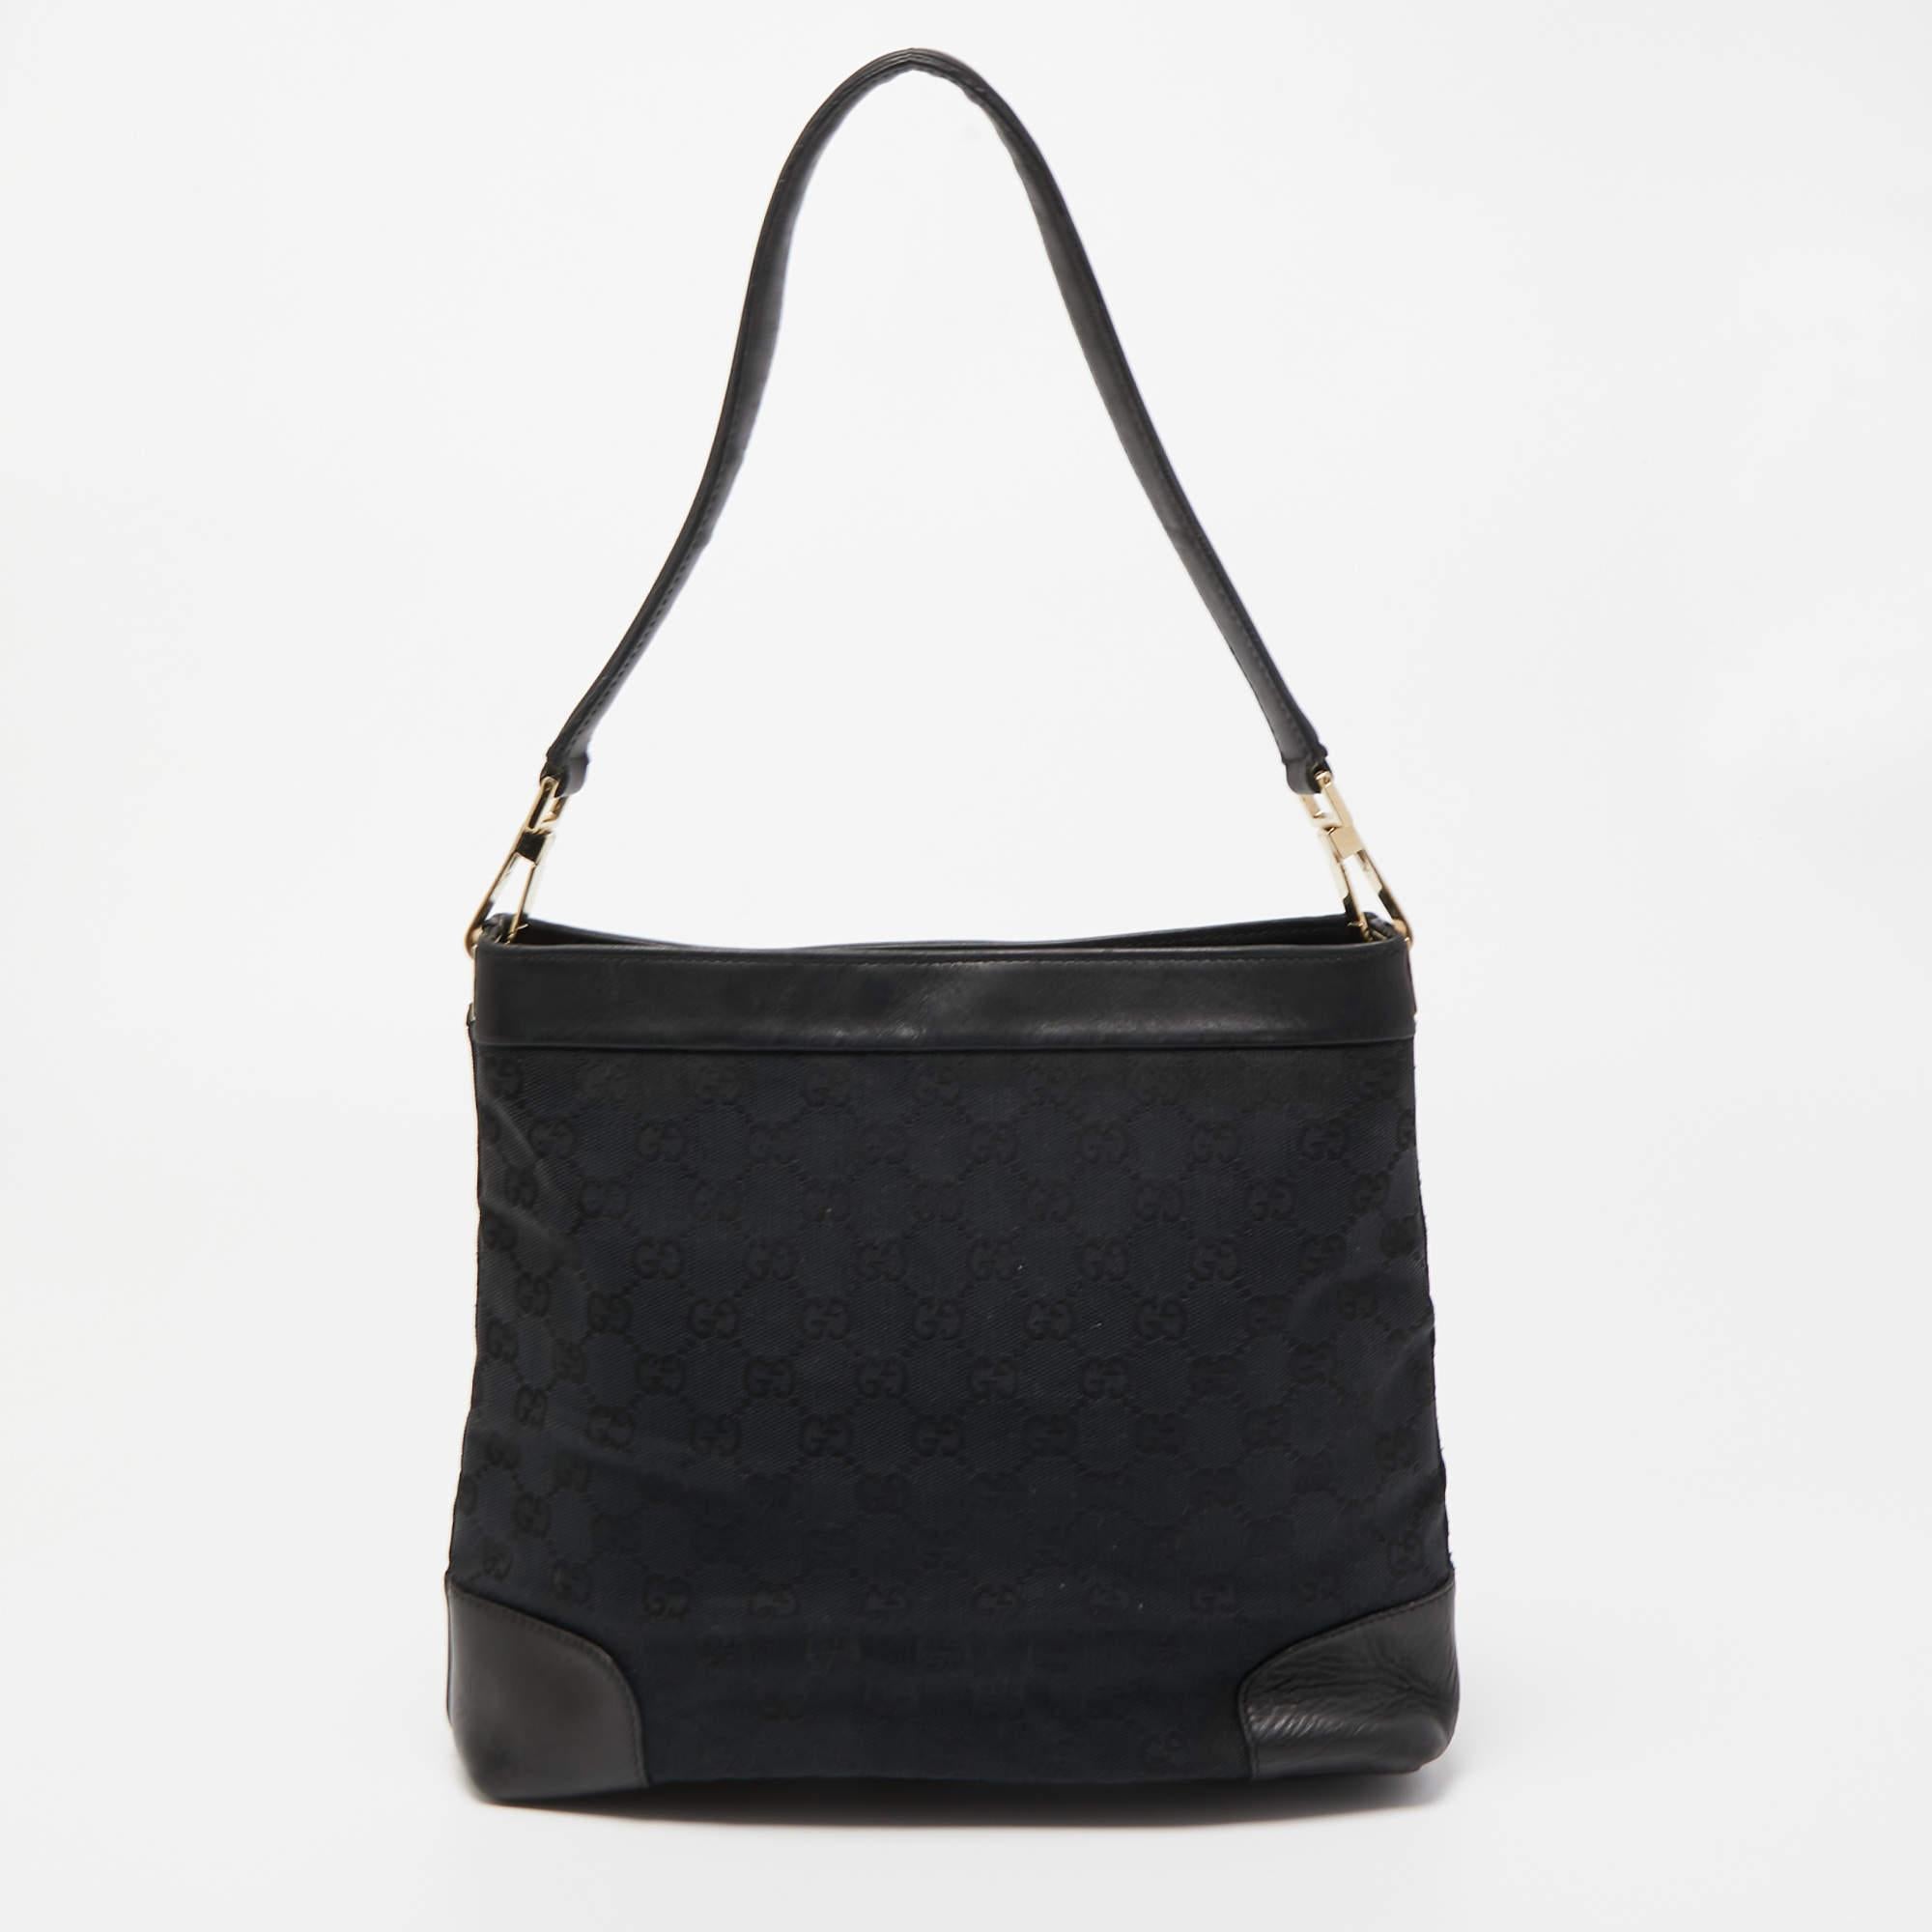 Women's Gucci Black GG Canvas and Leather Shoulder Bag